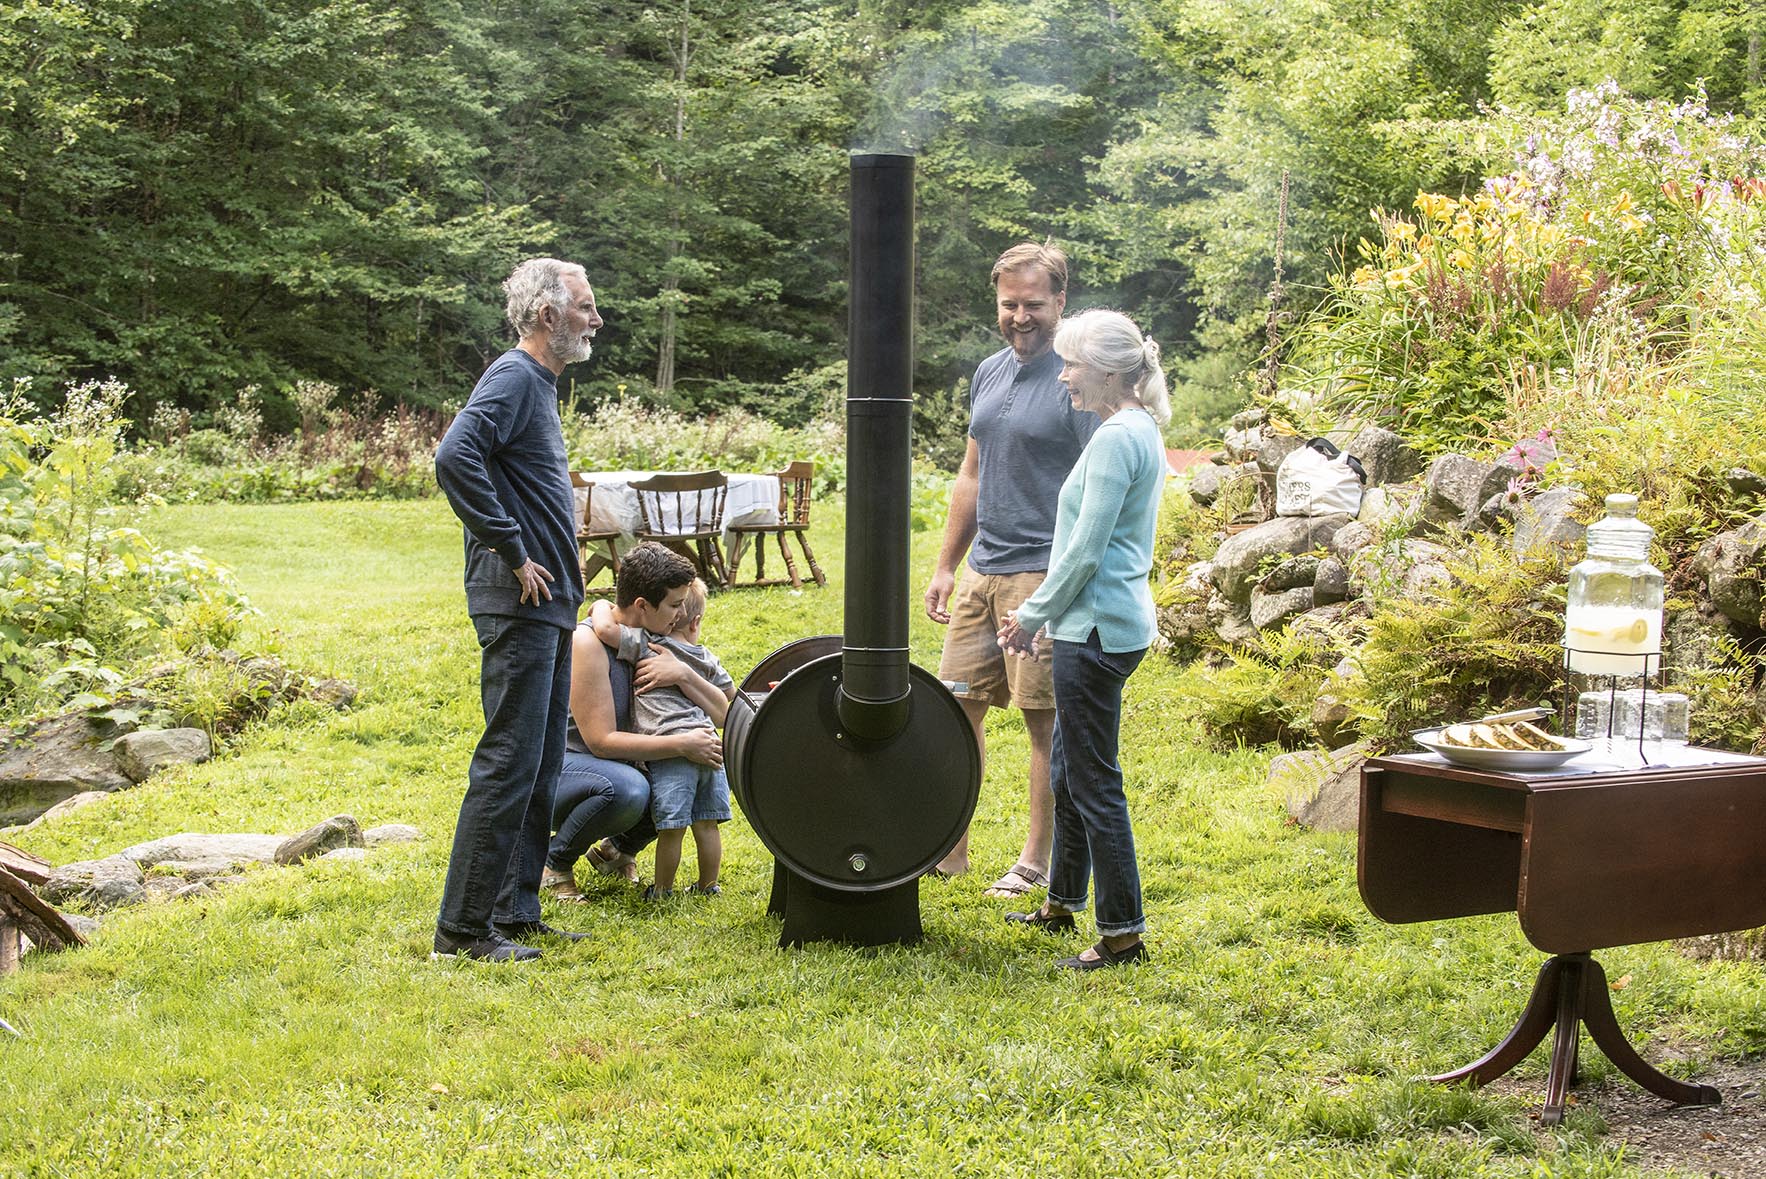 A family standing around a grill, looking happy.